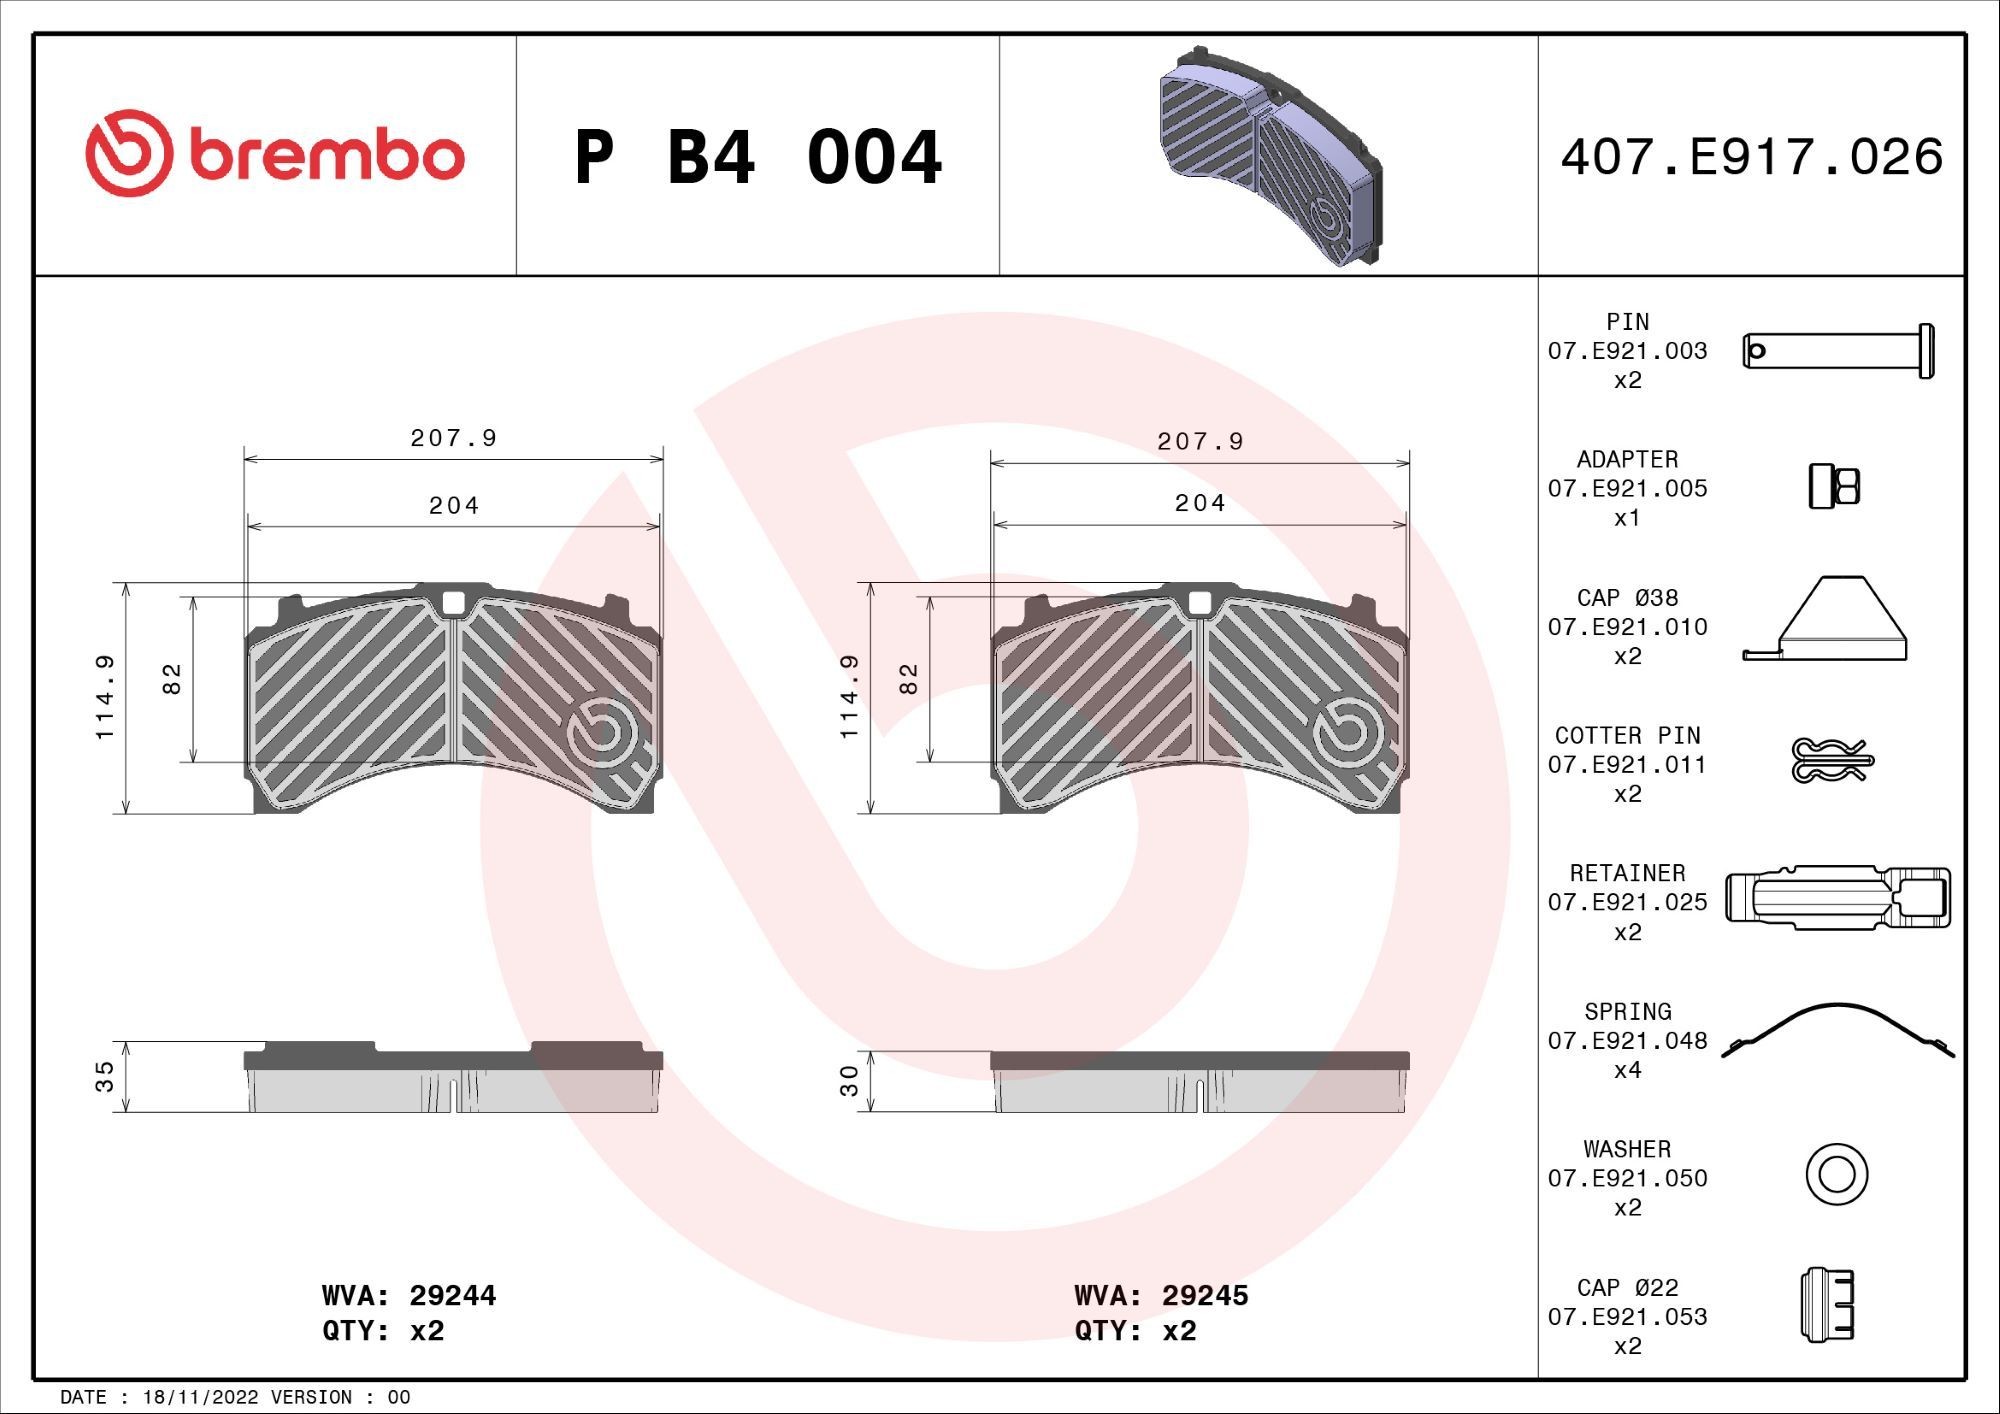 BREMBO P B4 004 Brake pad set excl. wear warning contact, with accessories